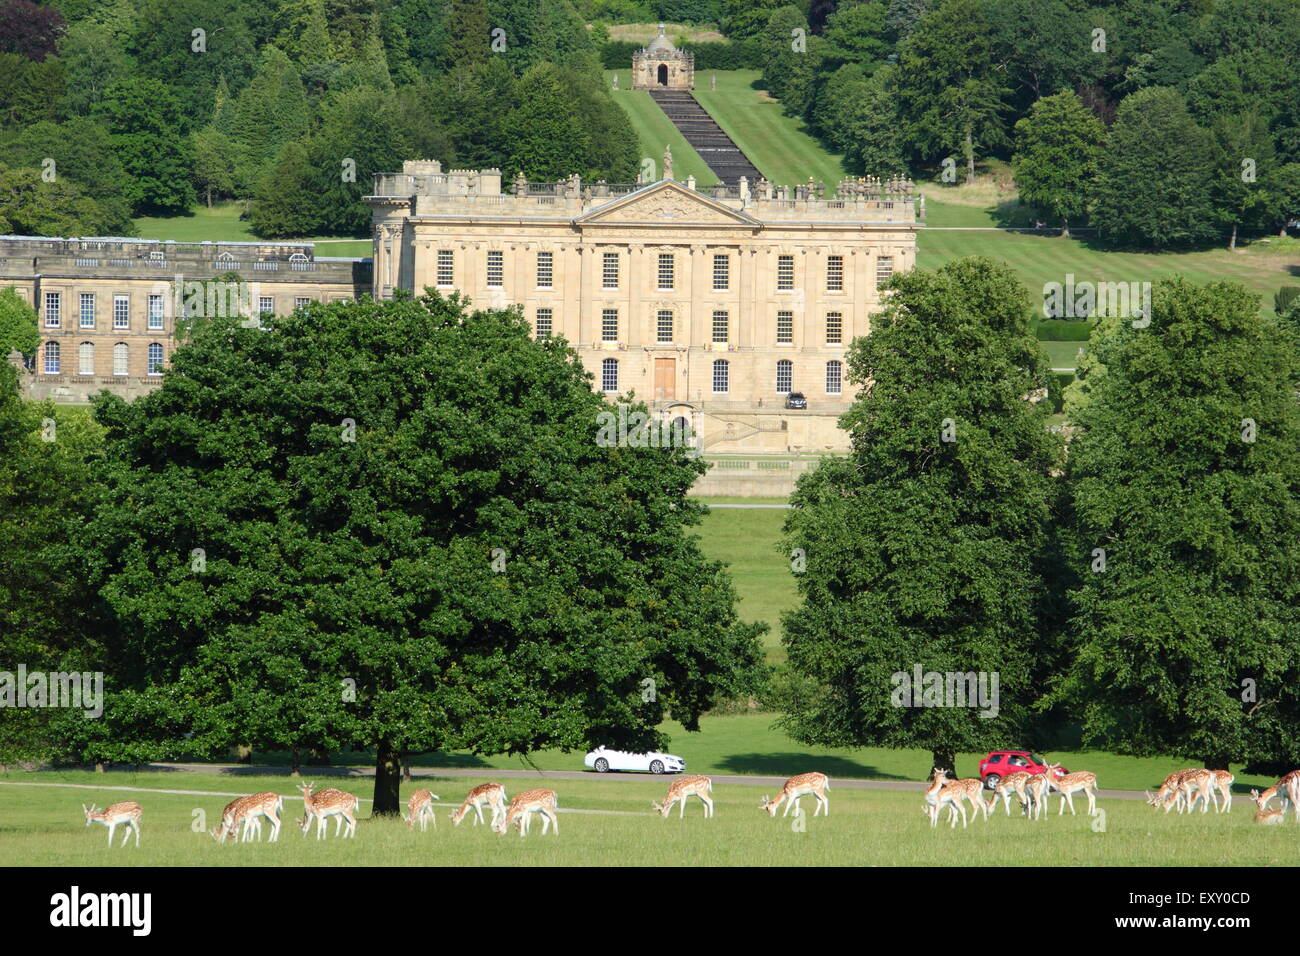 Fallow deer graze in the parkland surrounding Chatsworth House (pictured) on a warm, summer day, Peak District, Derbyshire UK Stock Photo